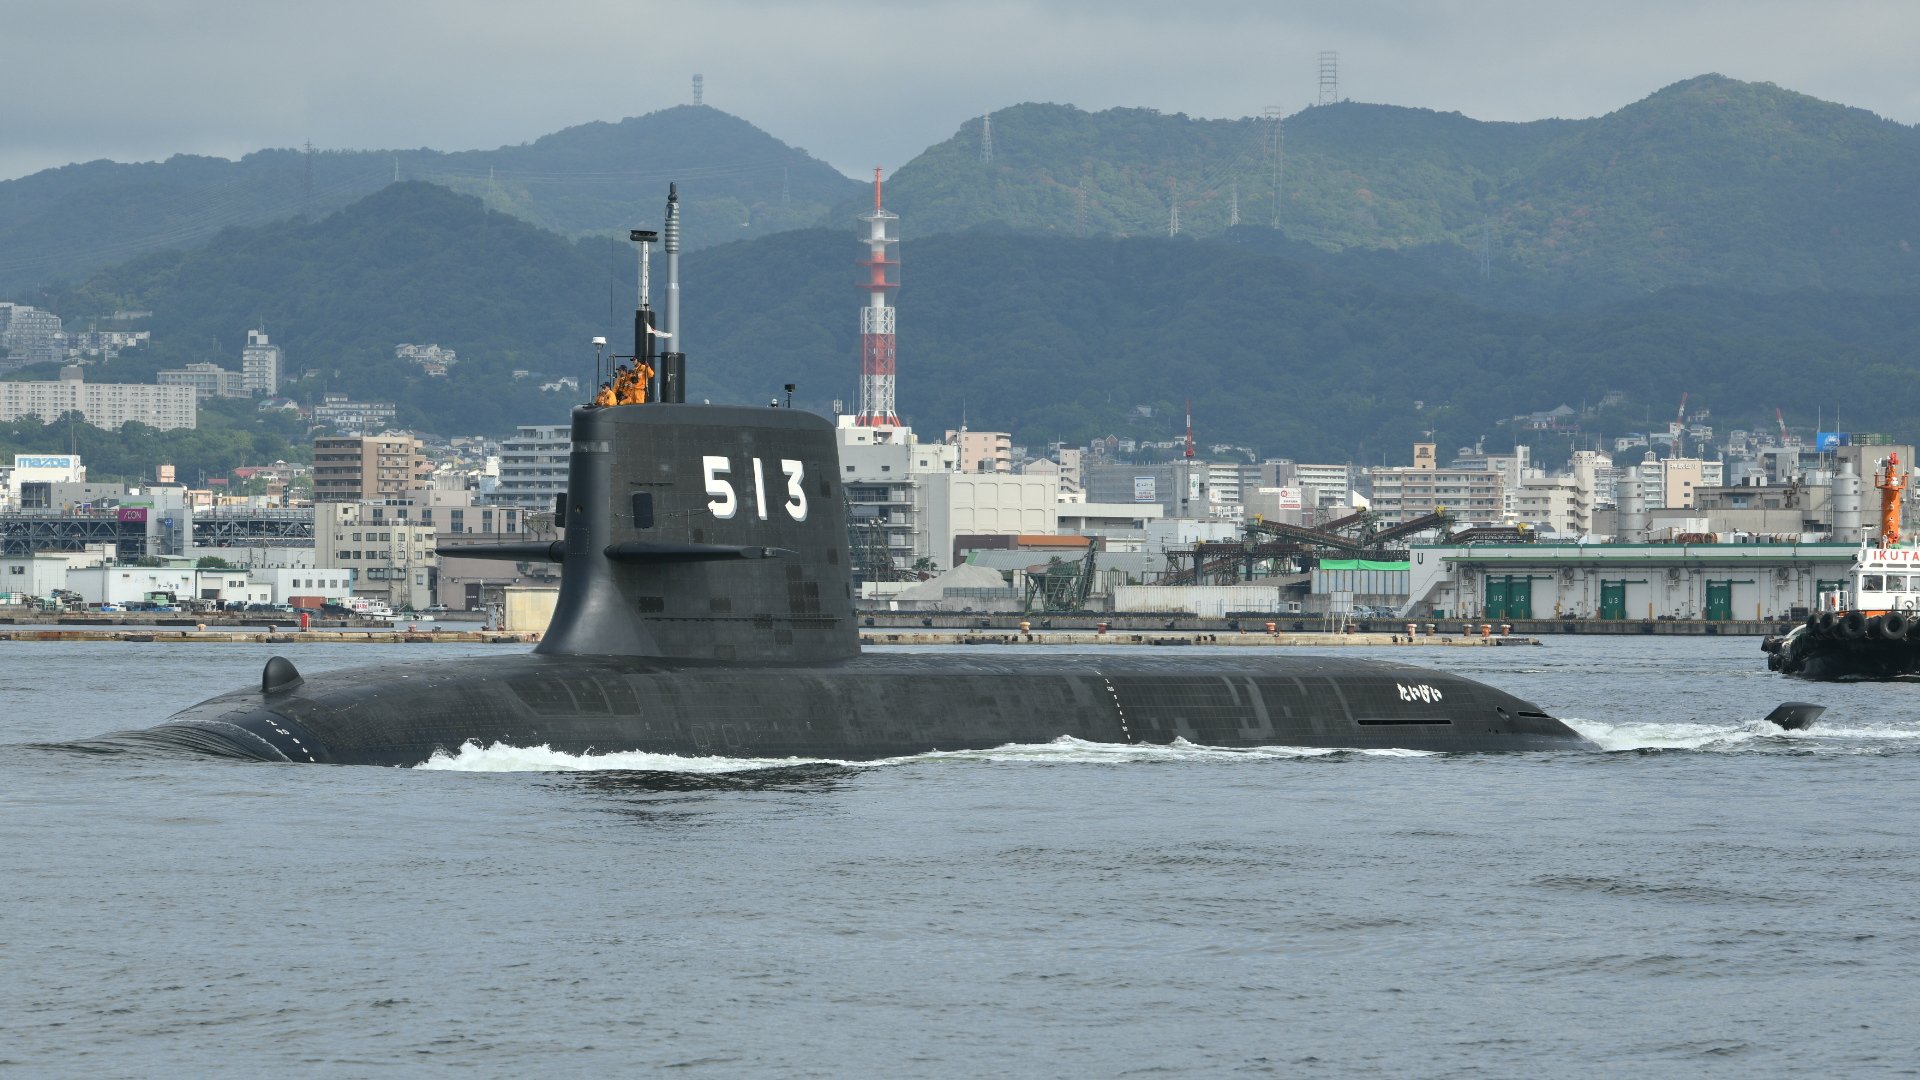 Japan Maritime Self-Defense Force JS Taigei (SS-513) Head out for Sea Trials